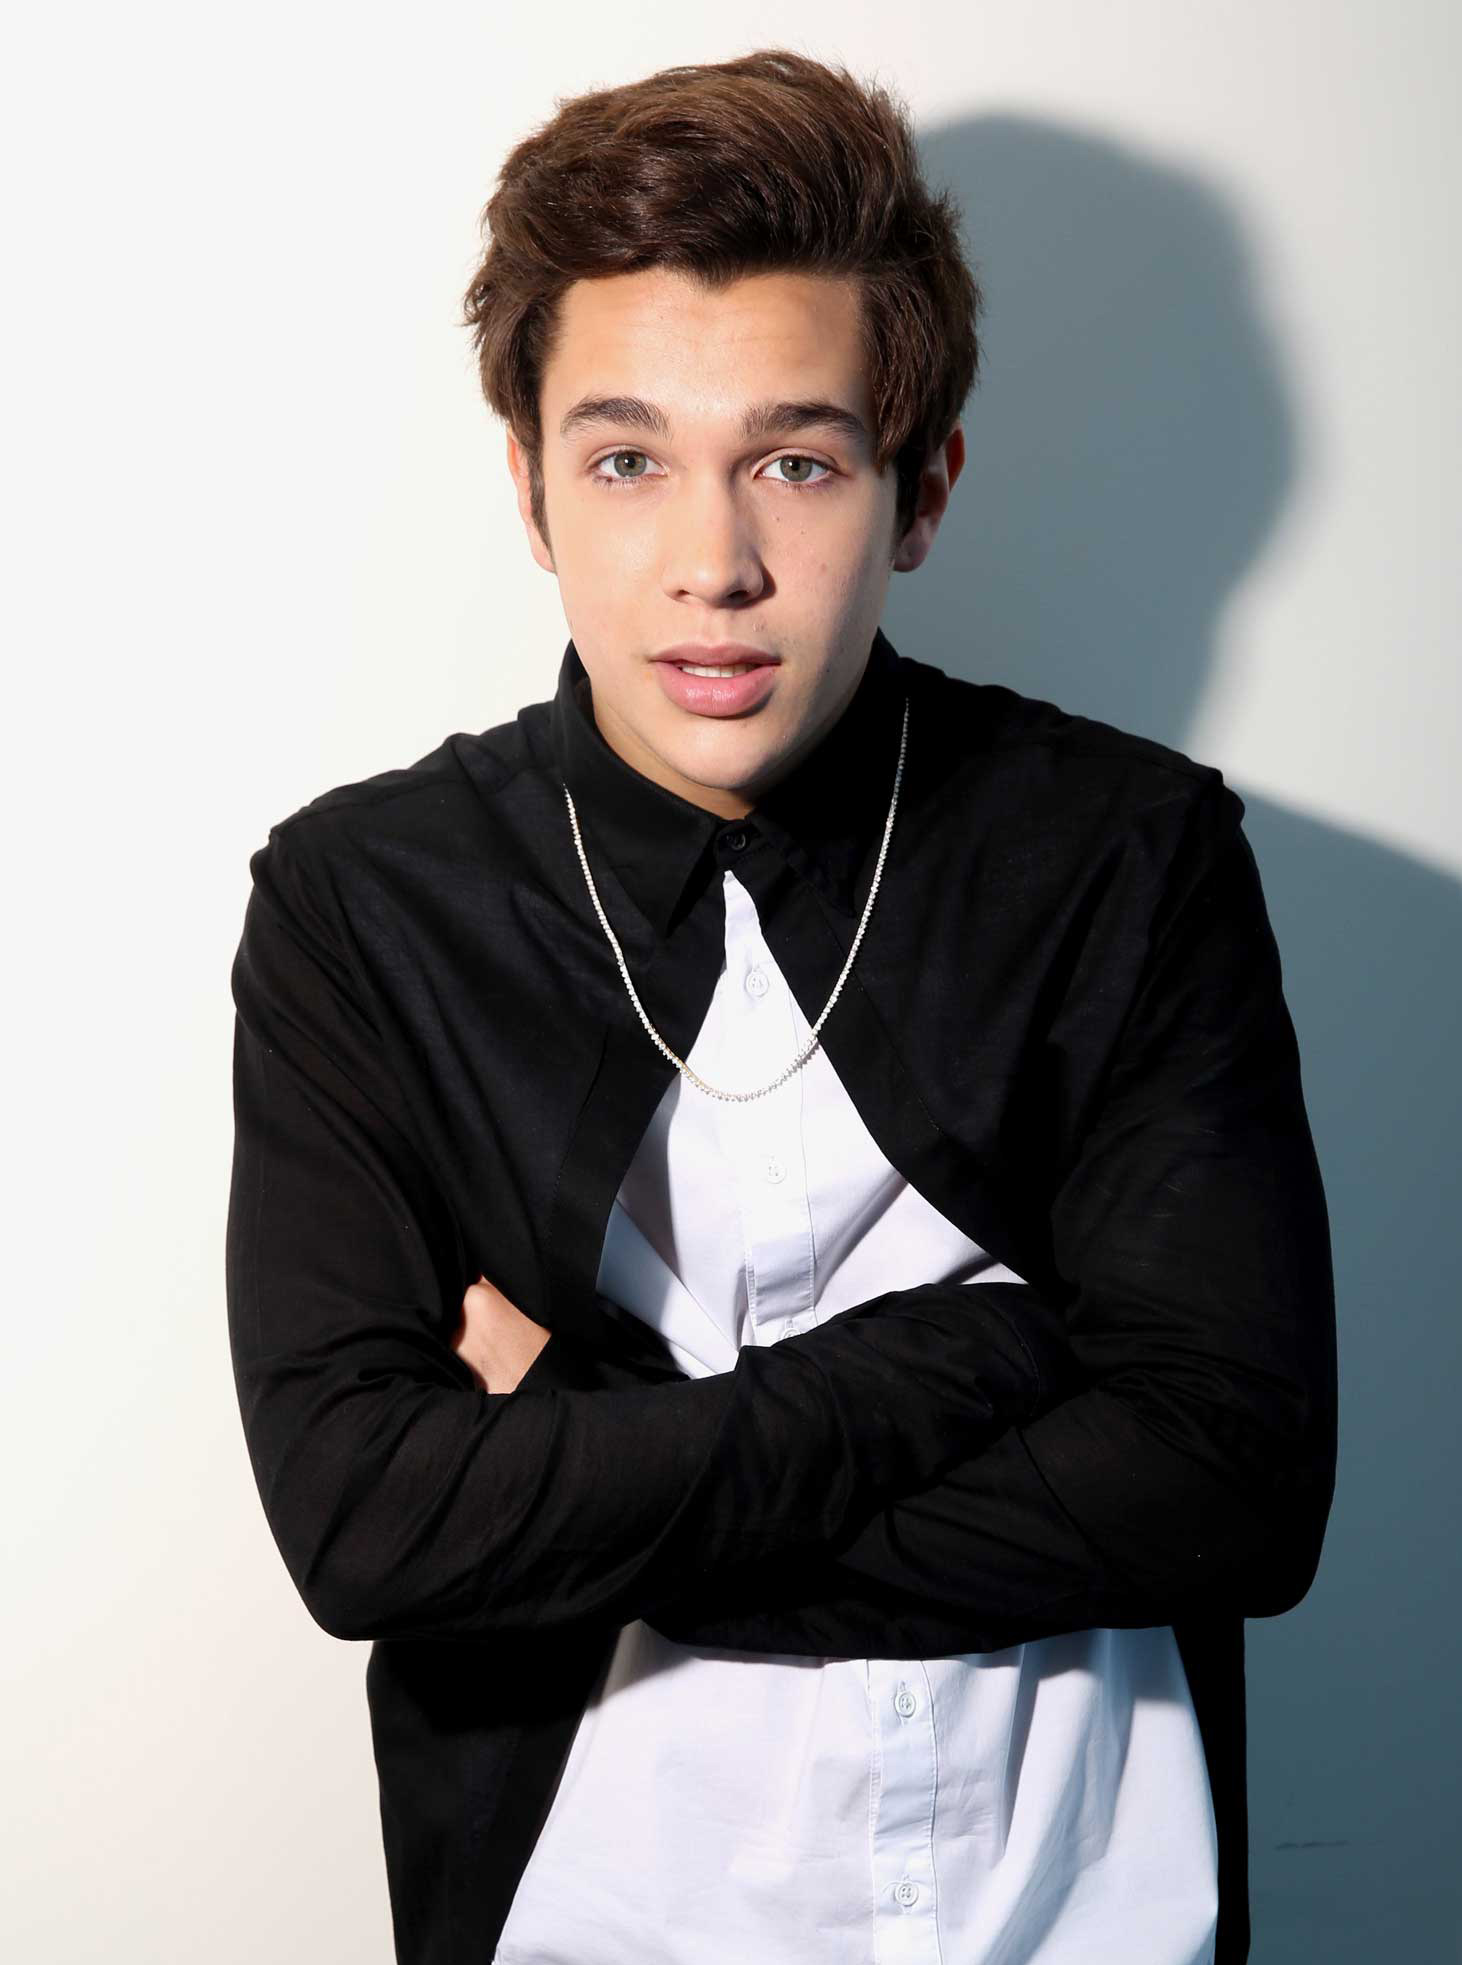 singer Austin Mahone poses for a portrait in Los Angeles. His EP "The Secret" released on May 23, 2014. (Photo by Matt Sayles/Invision/AP